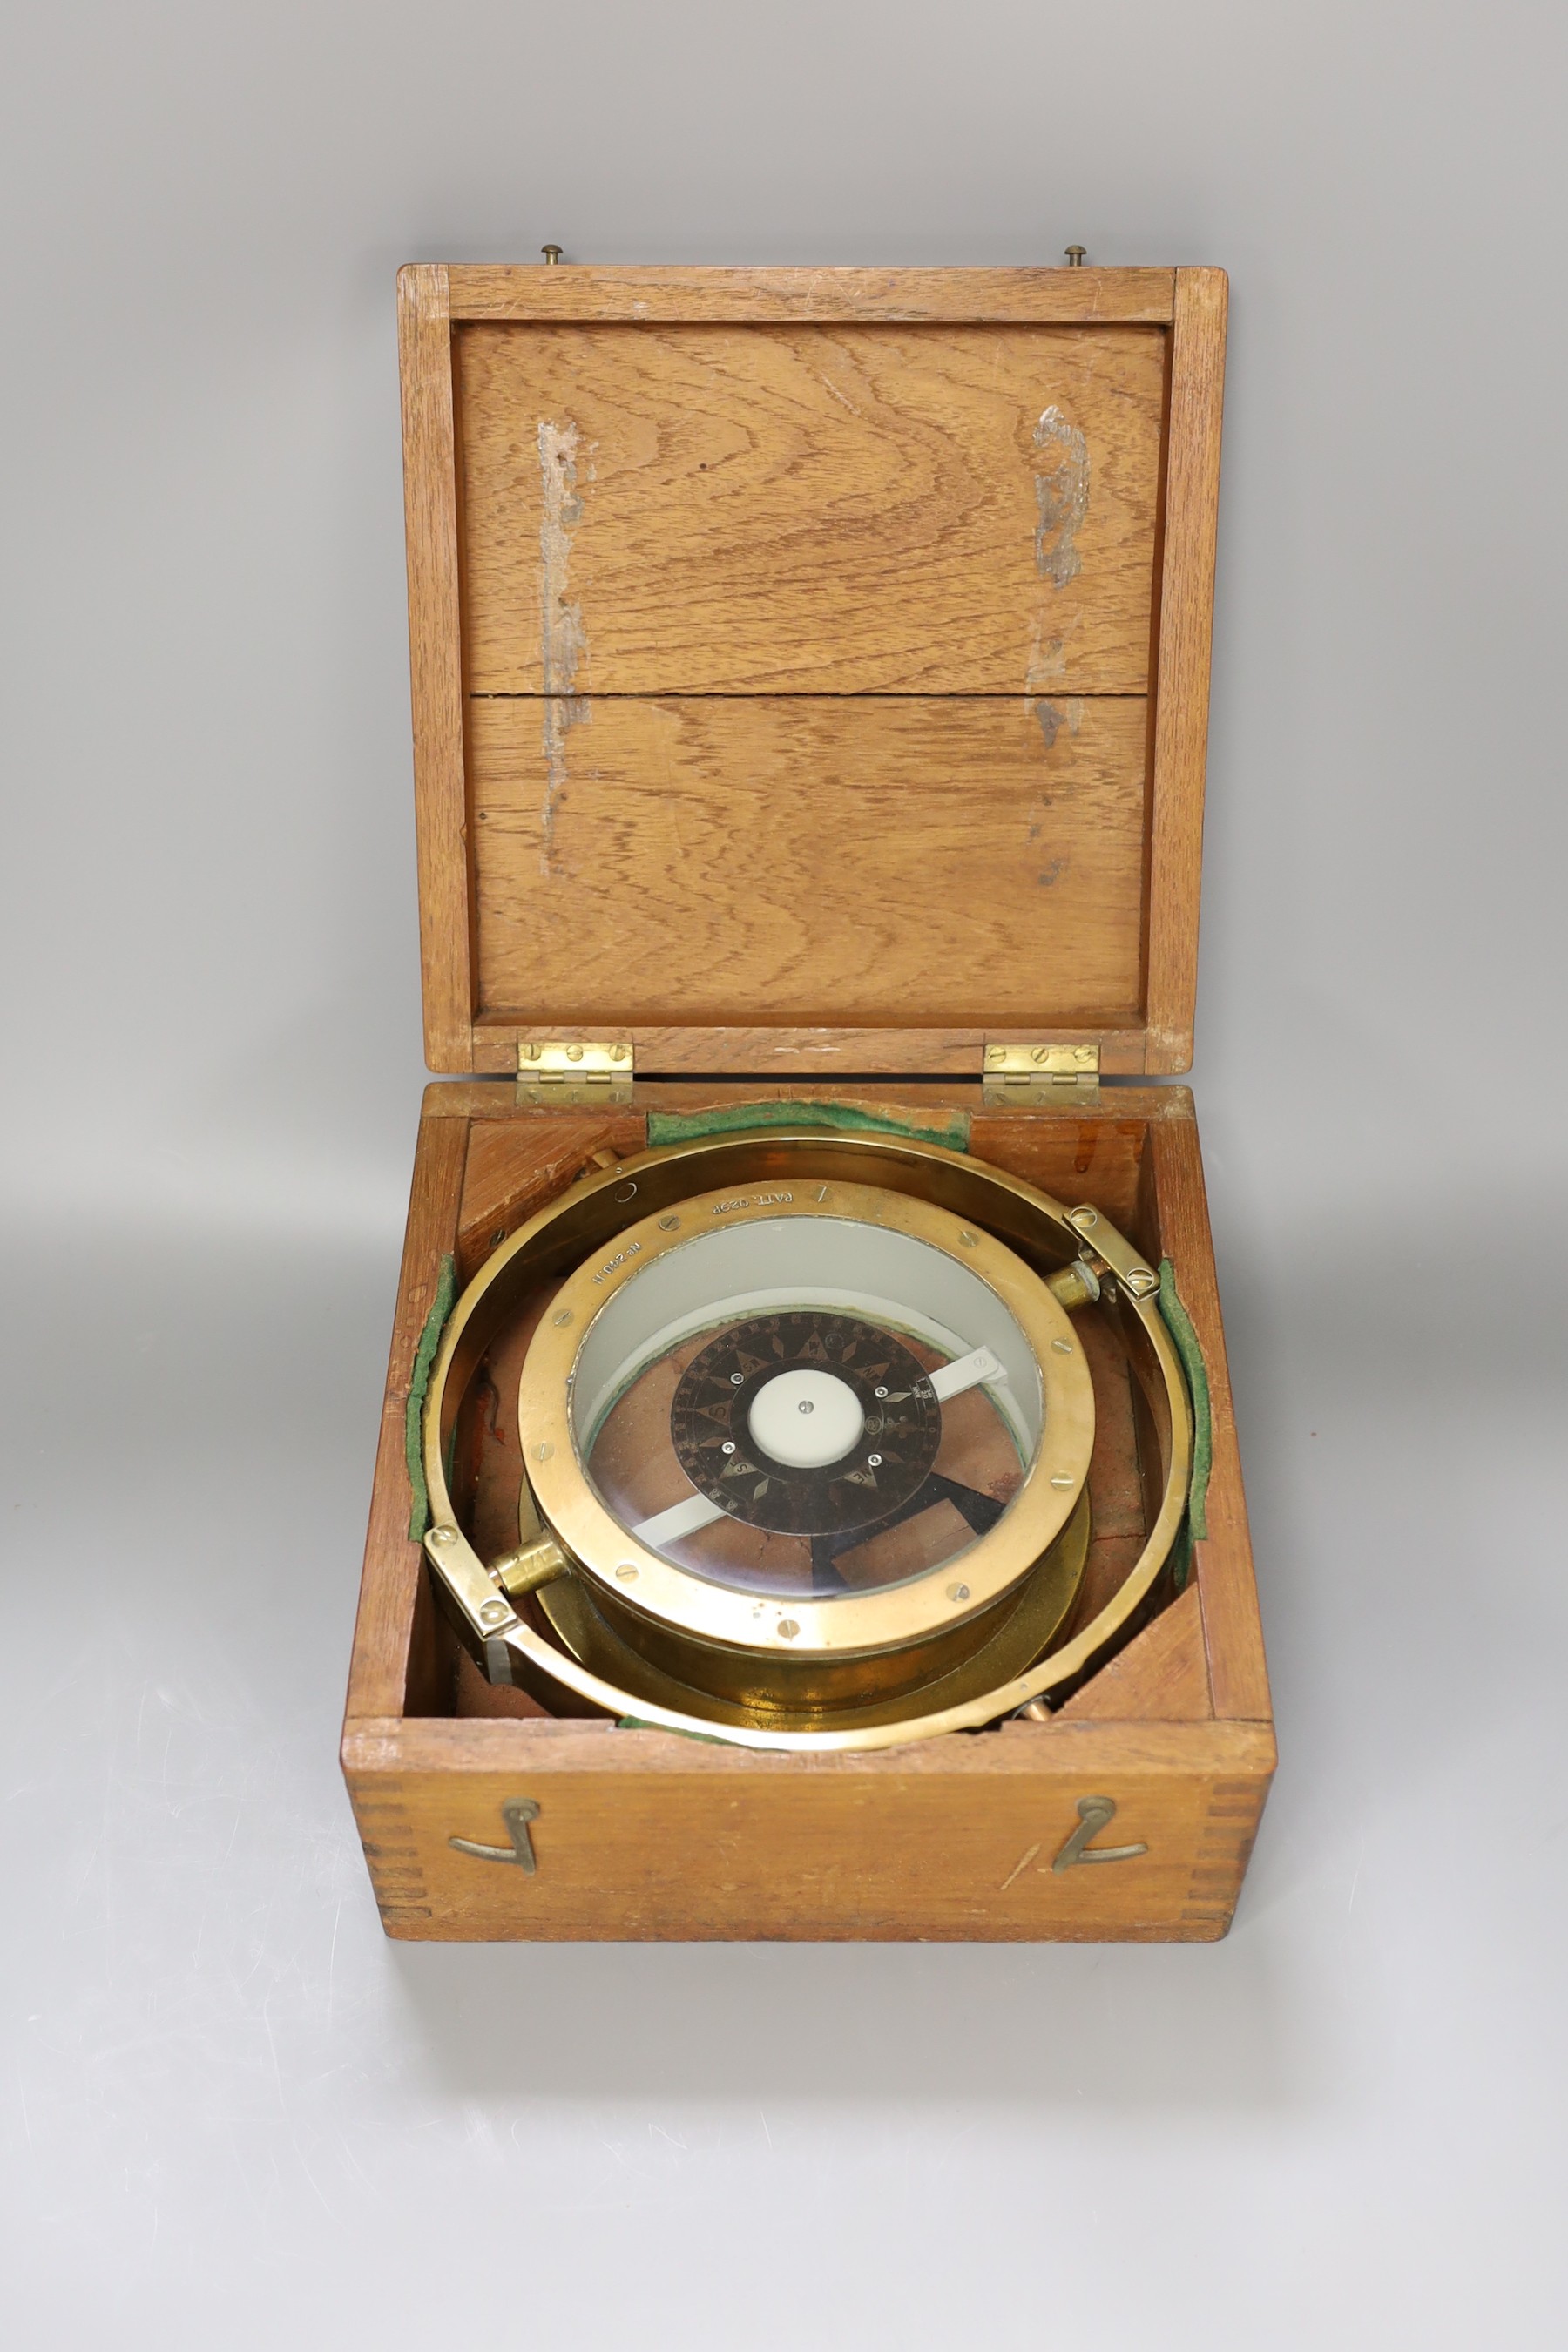 A wooden cased ship's compass, 14cm tall